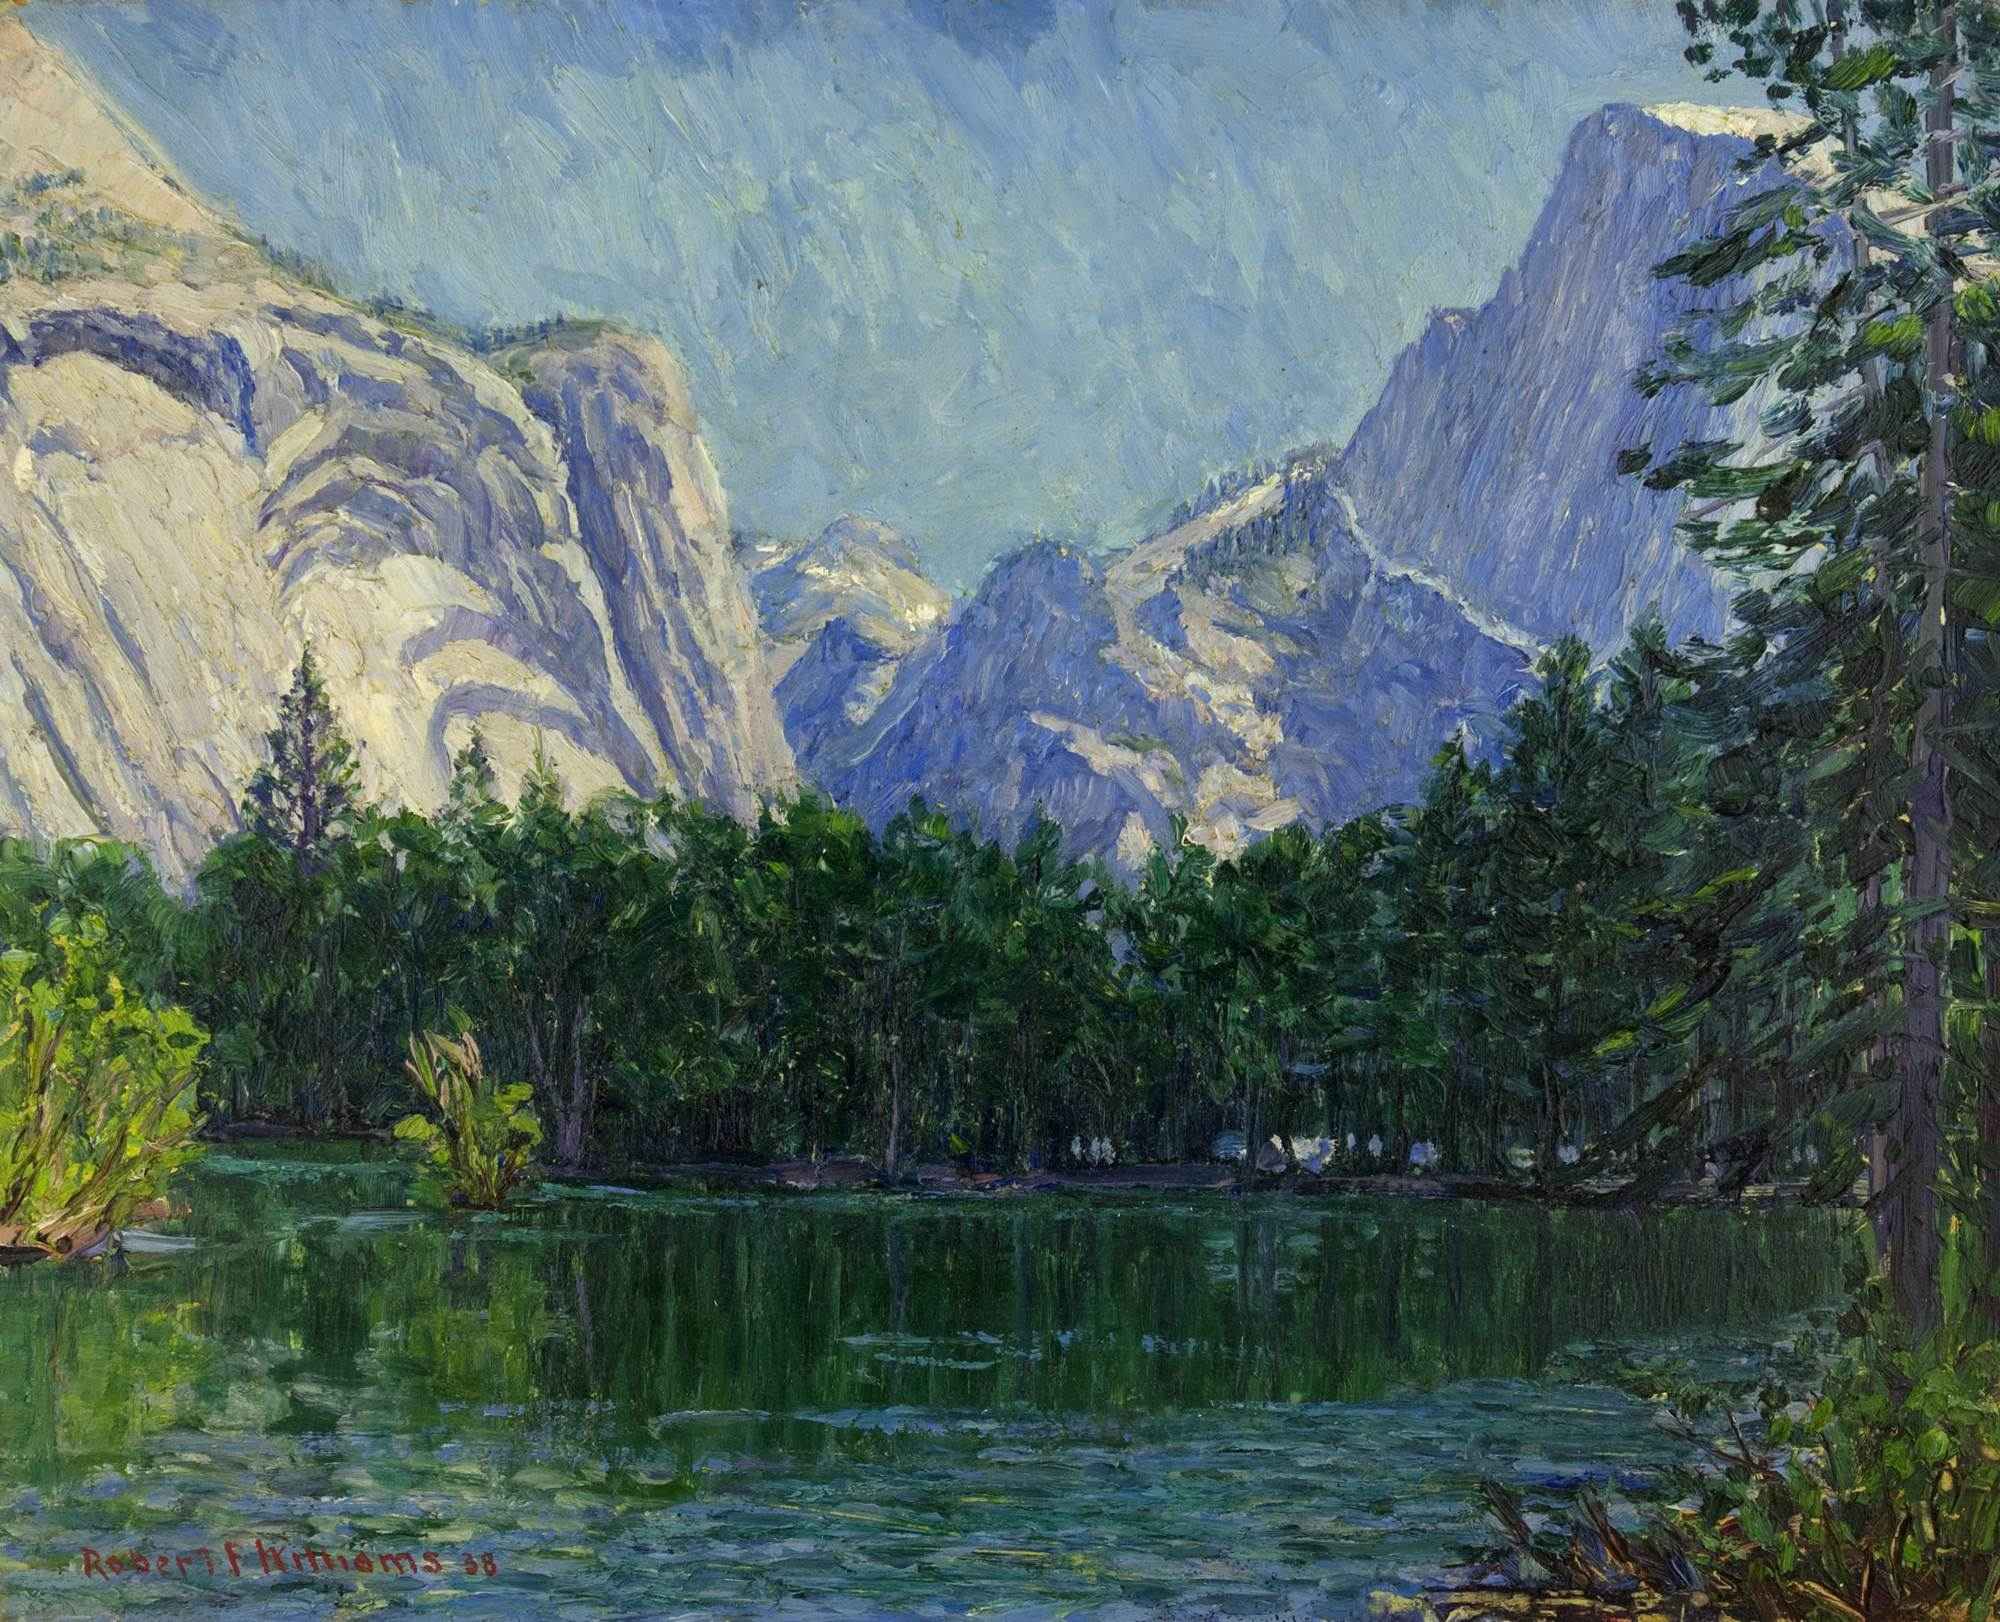 Painting Half Dome, Royal Arches - Merced River